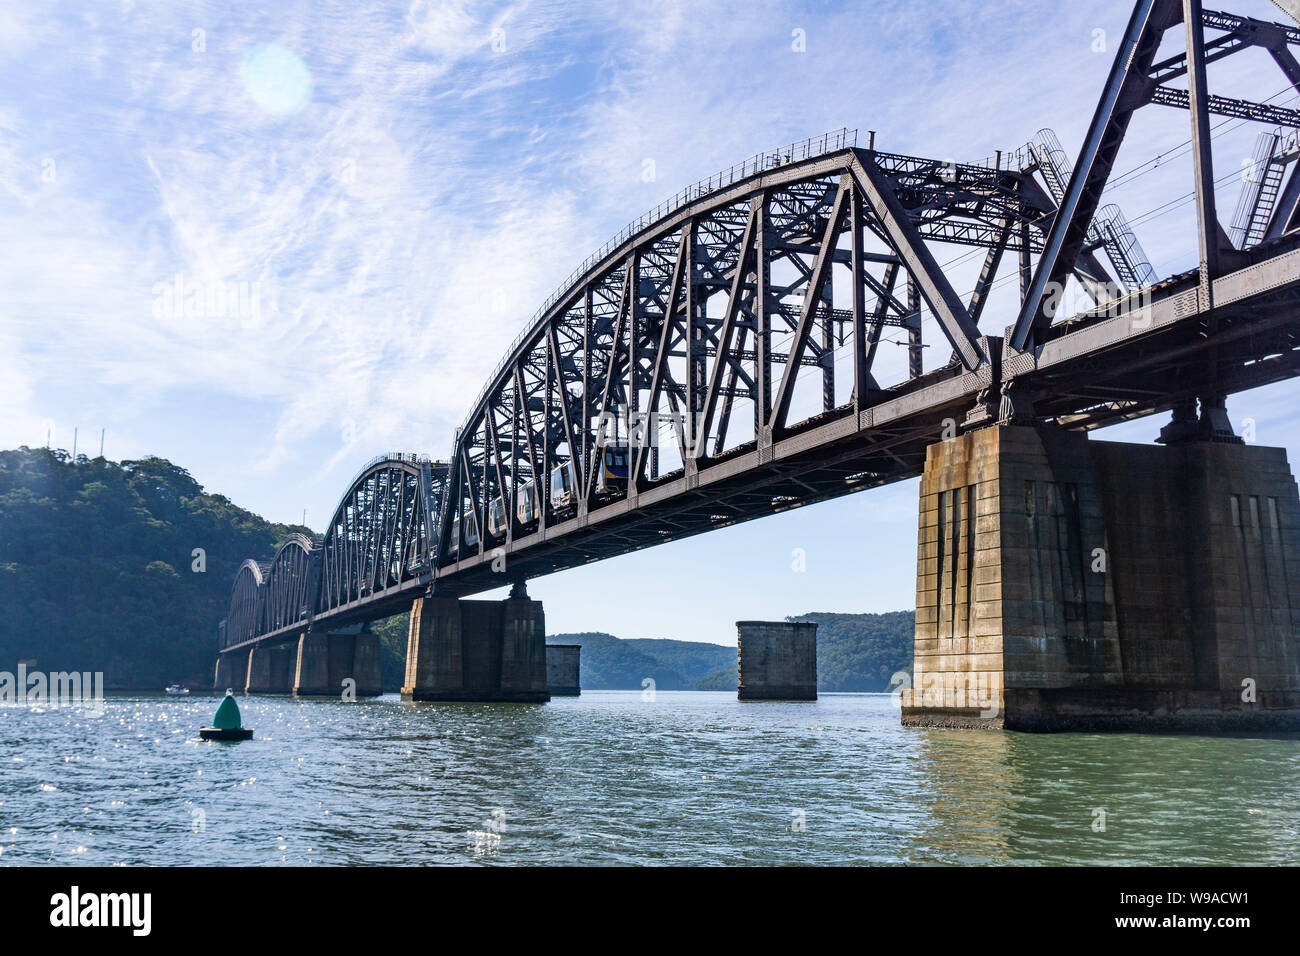 Hawkesbury Railway Bridge in Sydney pictured from the Hawkesbury river Stock Photo